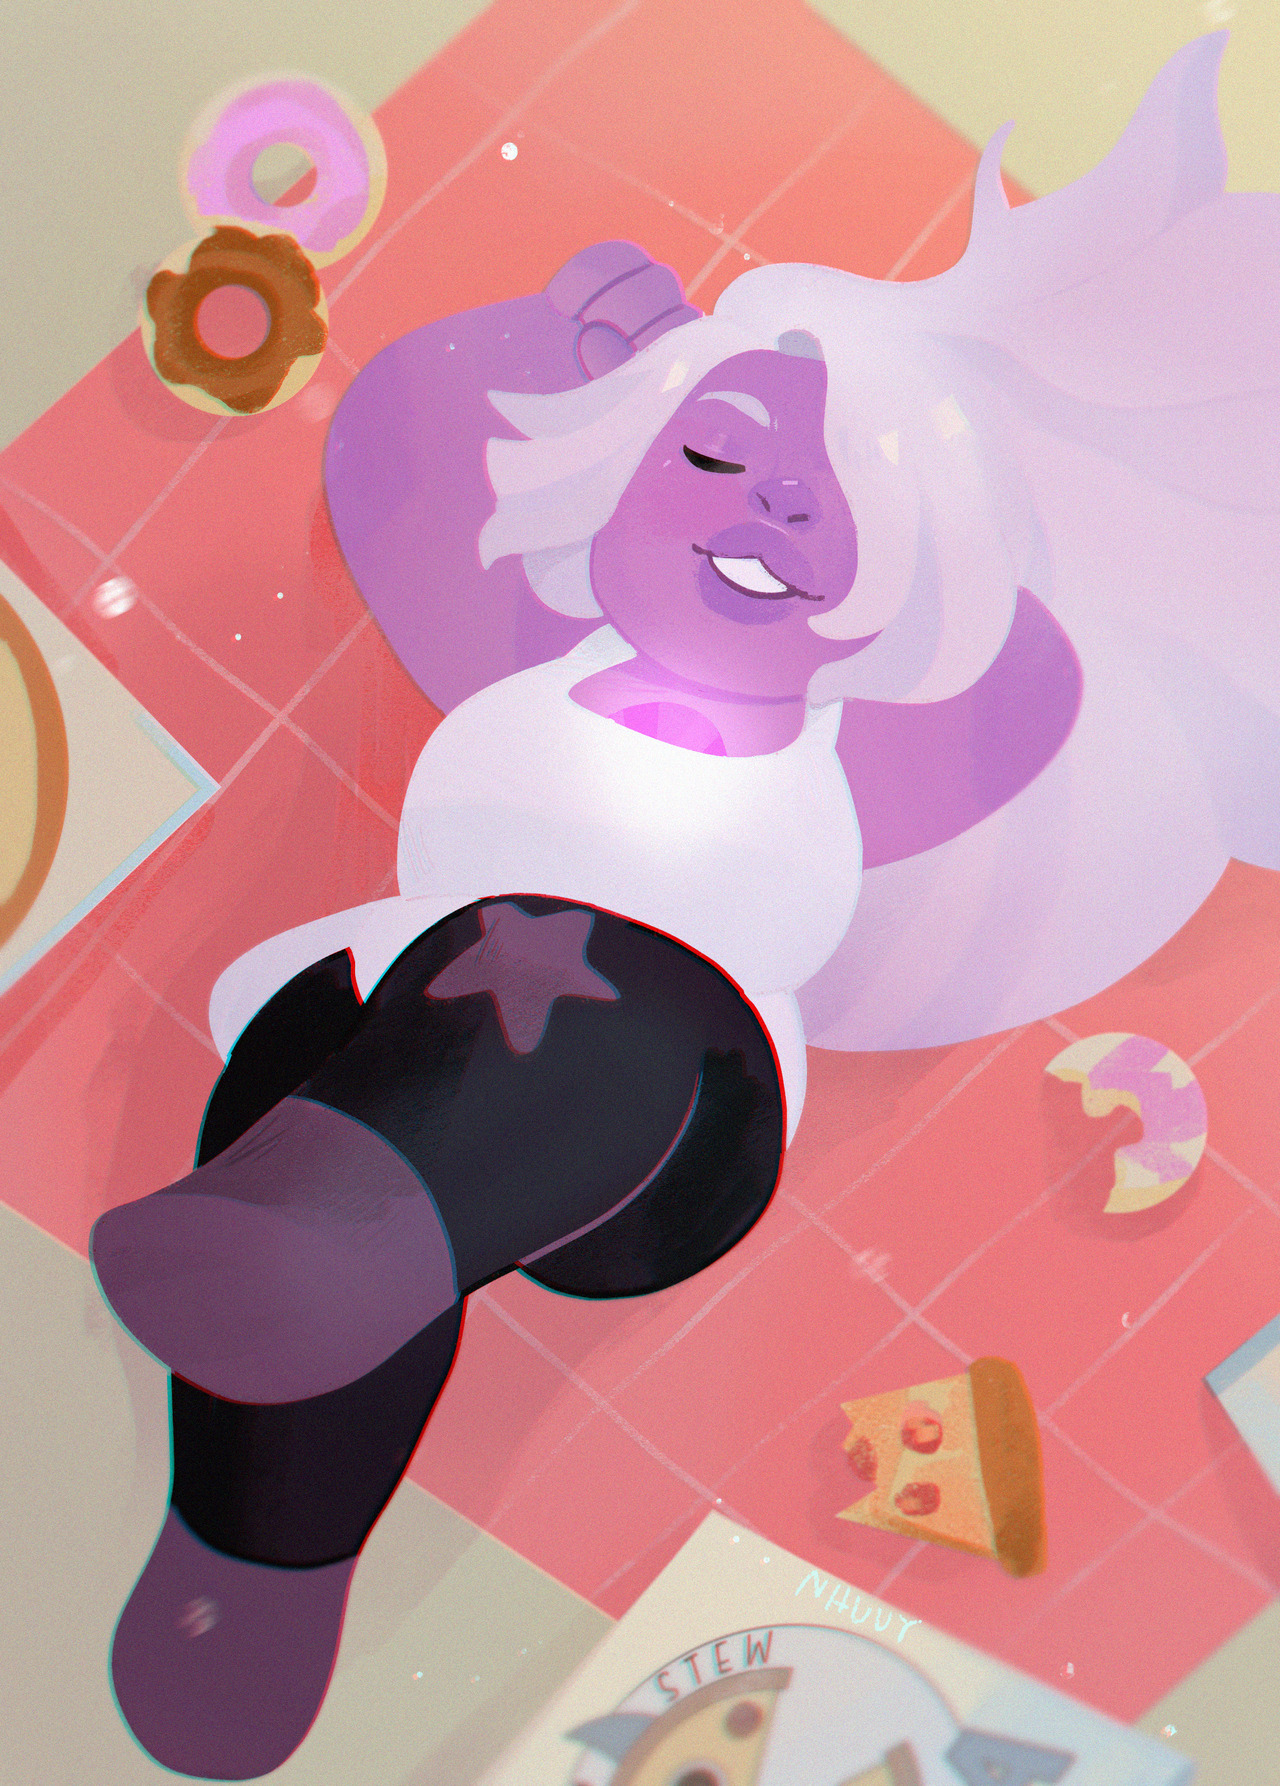 amethyst for @kamunyan, one of my art giveaway winners!! also posted a speedpaint of this if ya’ll are interested!